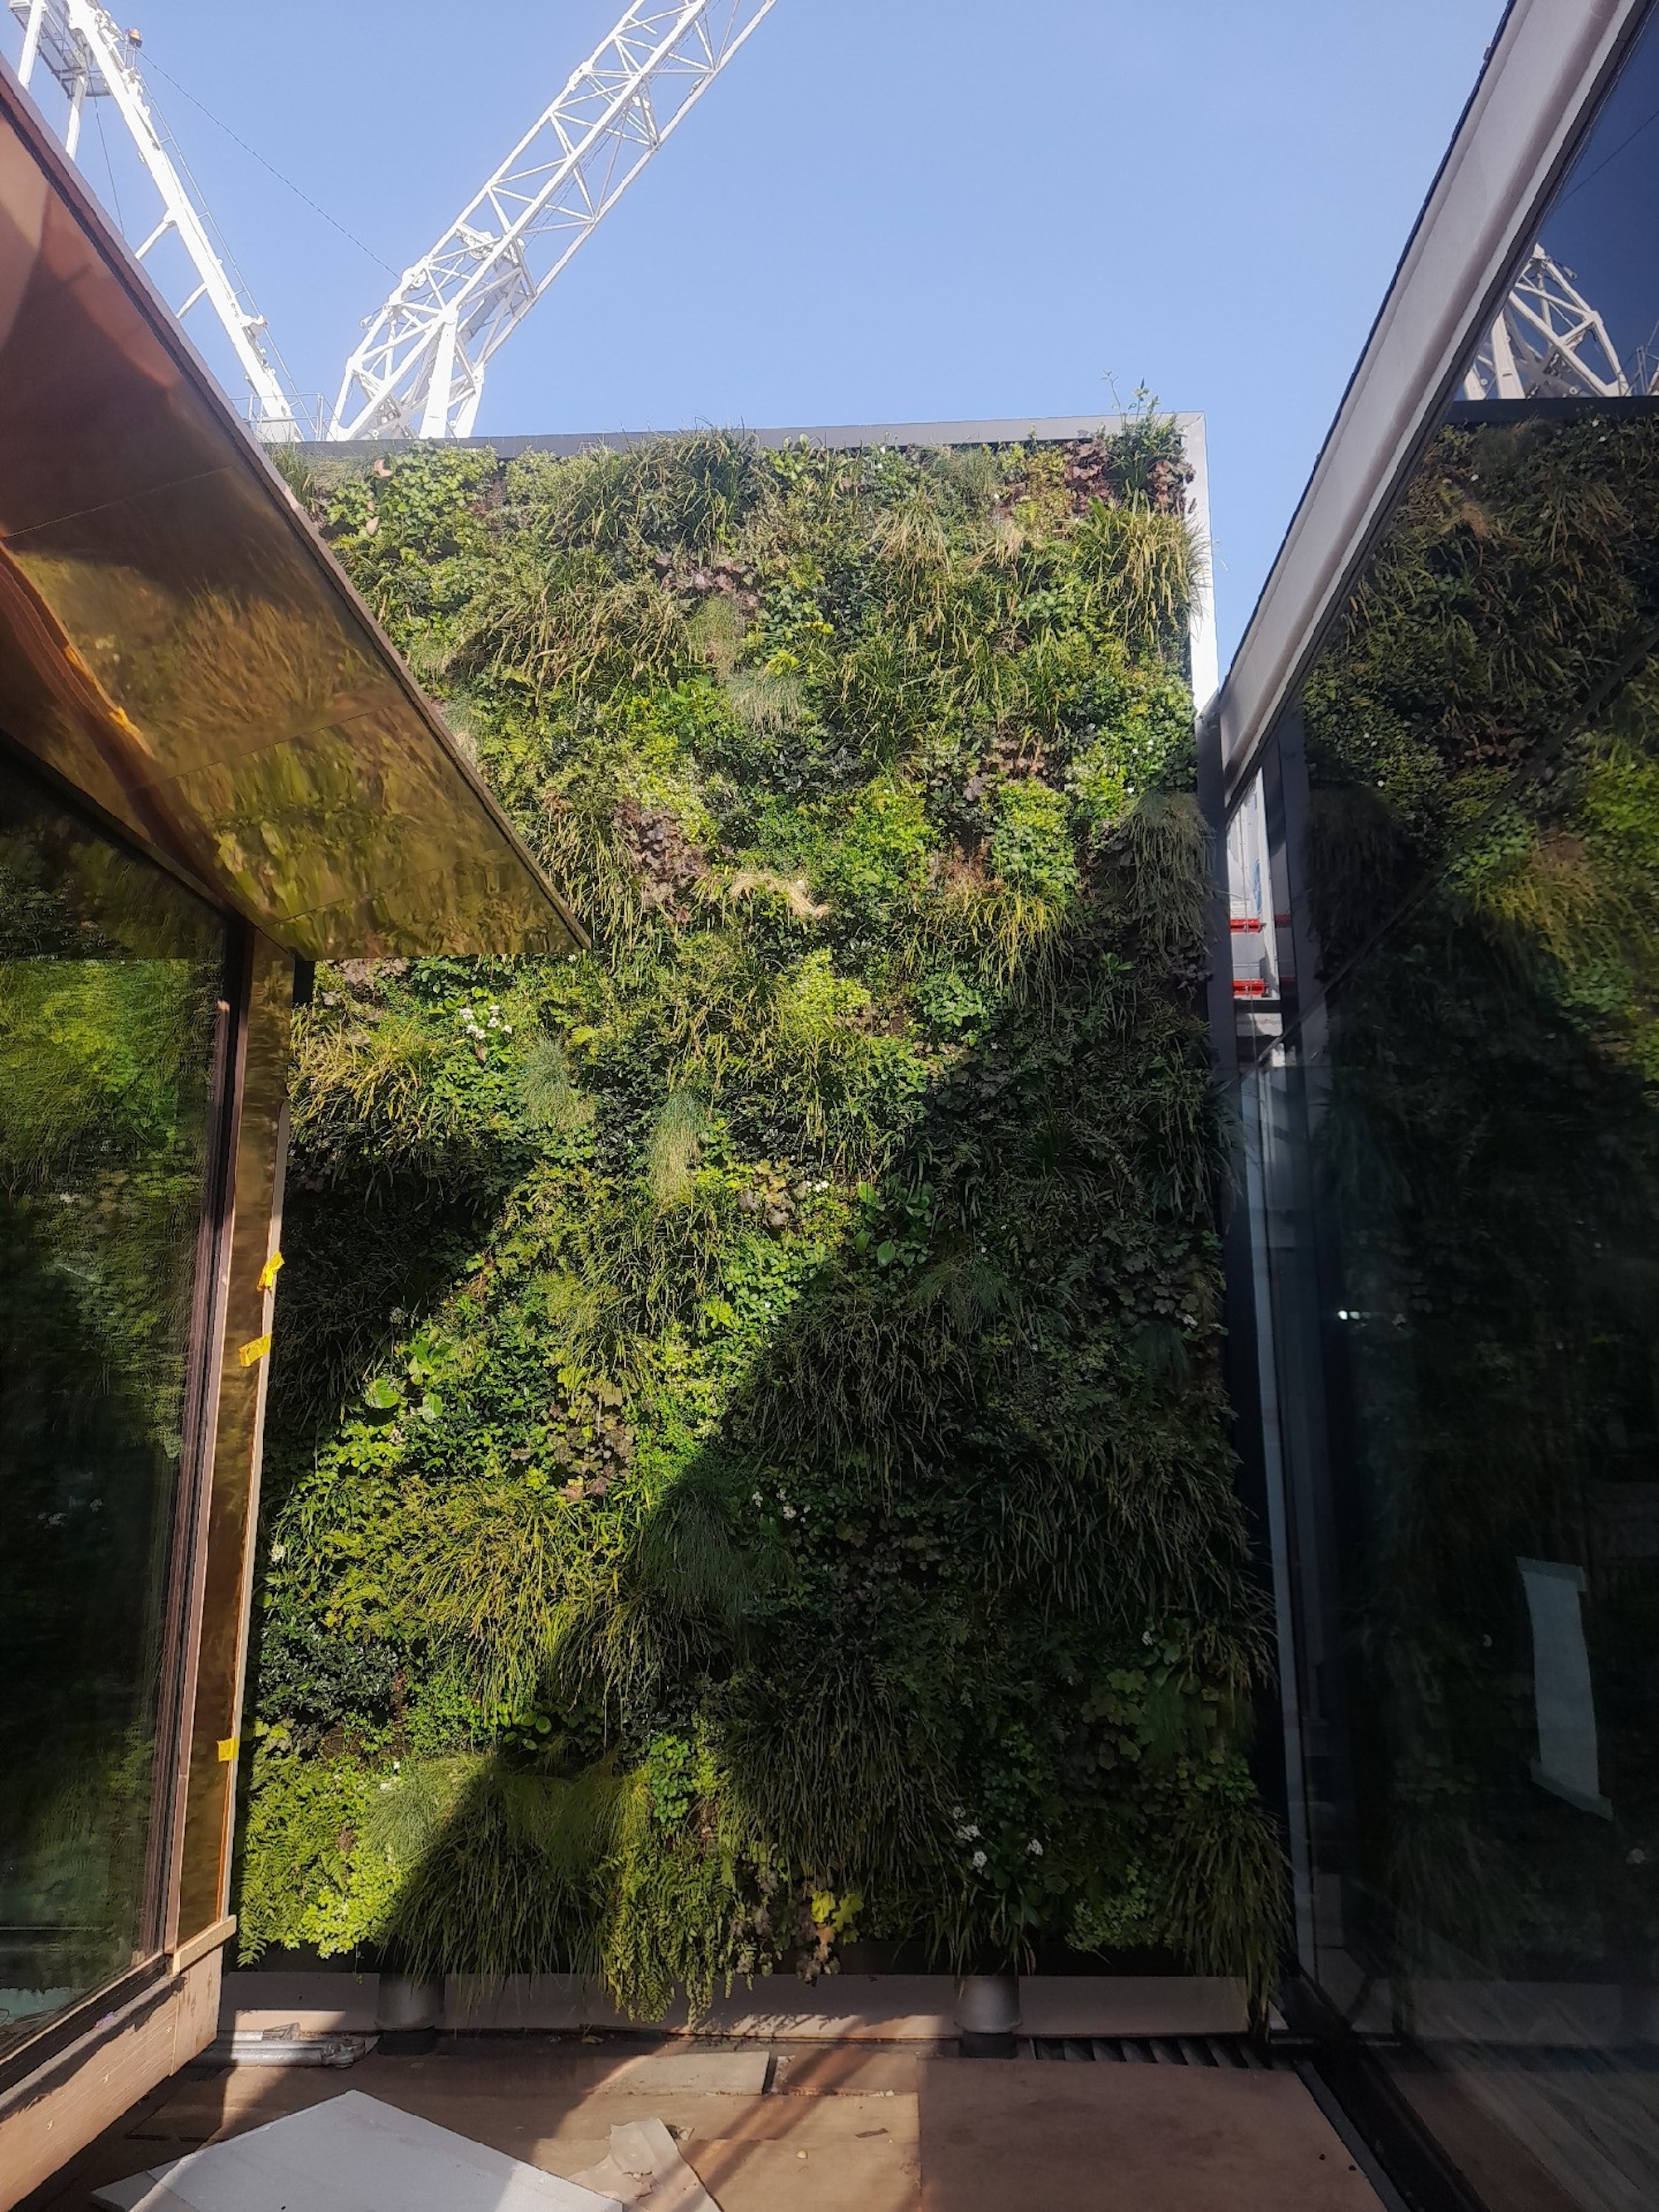 looking at a tall green wall behind a glass window